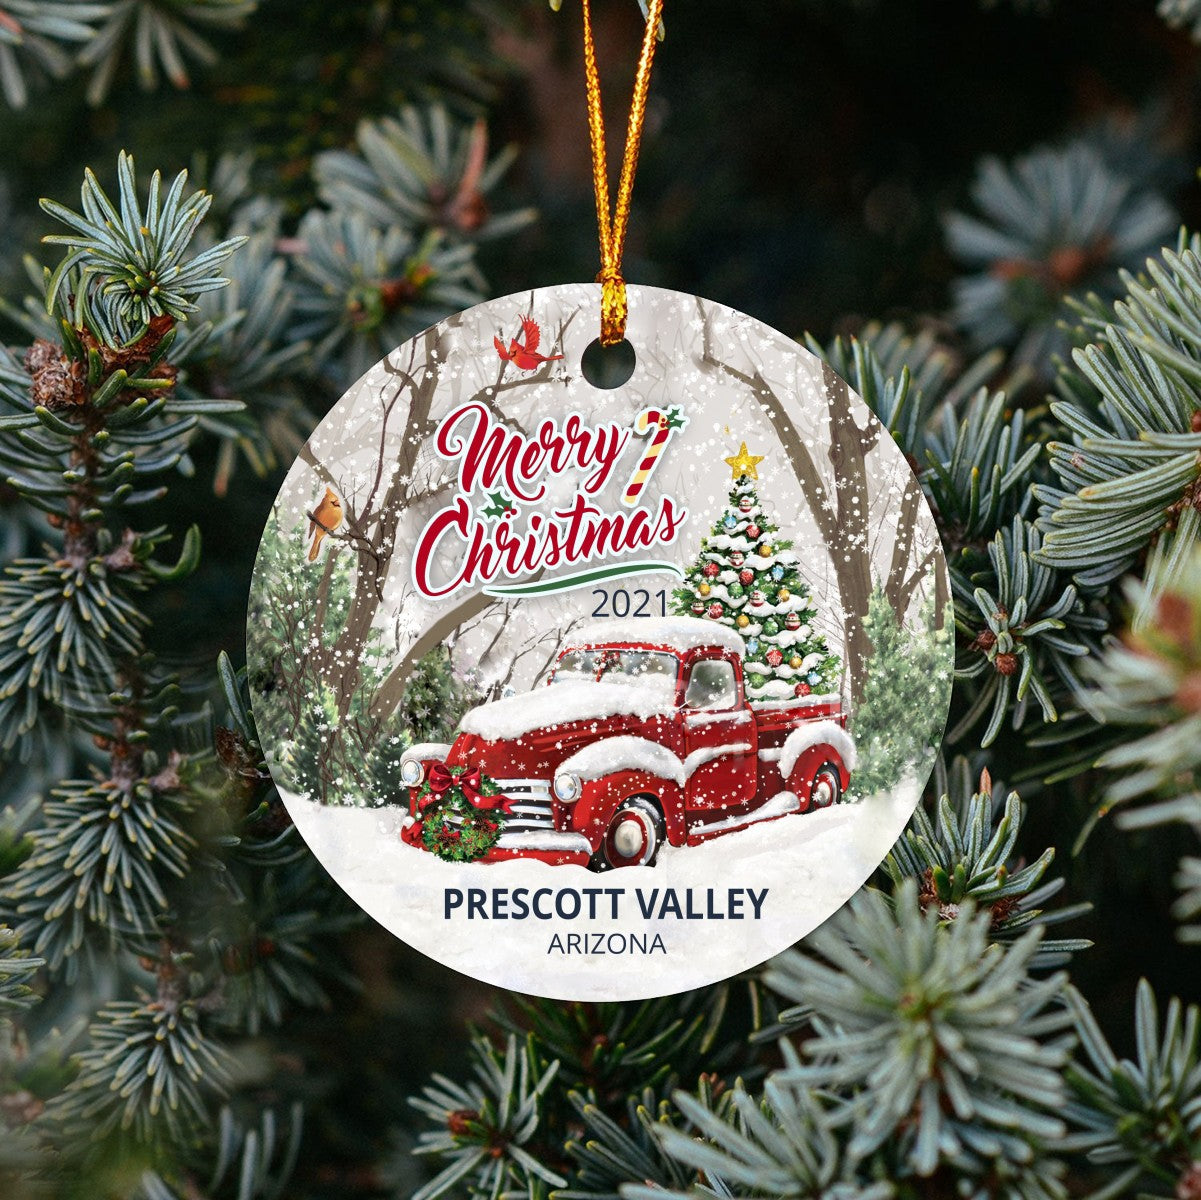 Christmas Tree Ornaments Prescott Valley - Ornament Customize With Name City And State Prescott Valley Arizona AZ - Red Truck Xmas Ornaments 3'' Plastic Gift For Family, Friend And Housewarming